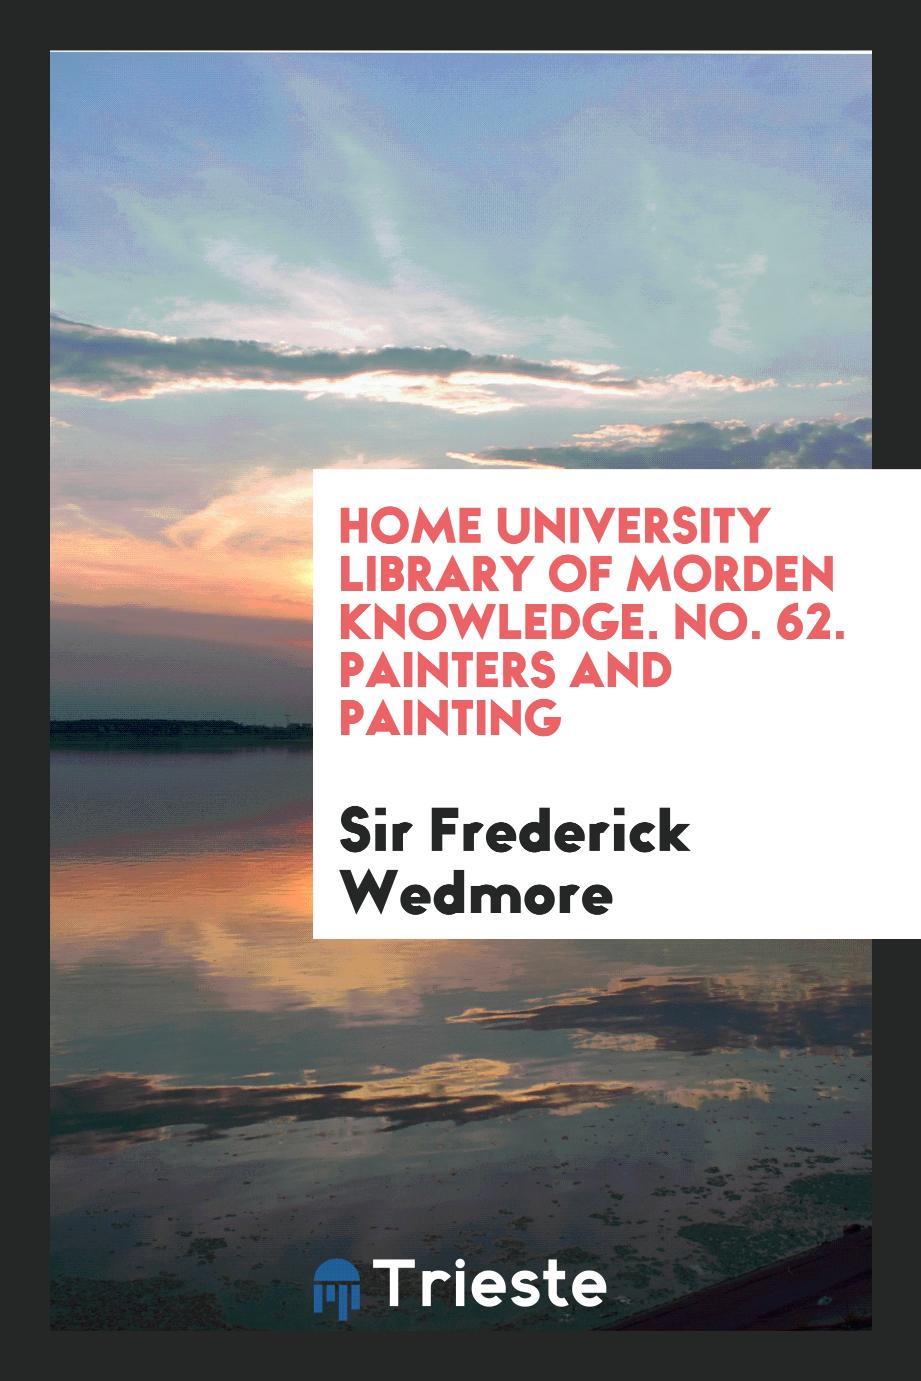 Home University library of morden knowledge. No. 62. Painters and painting